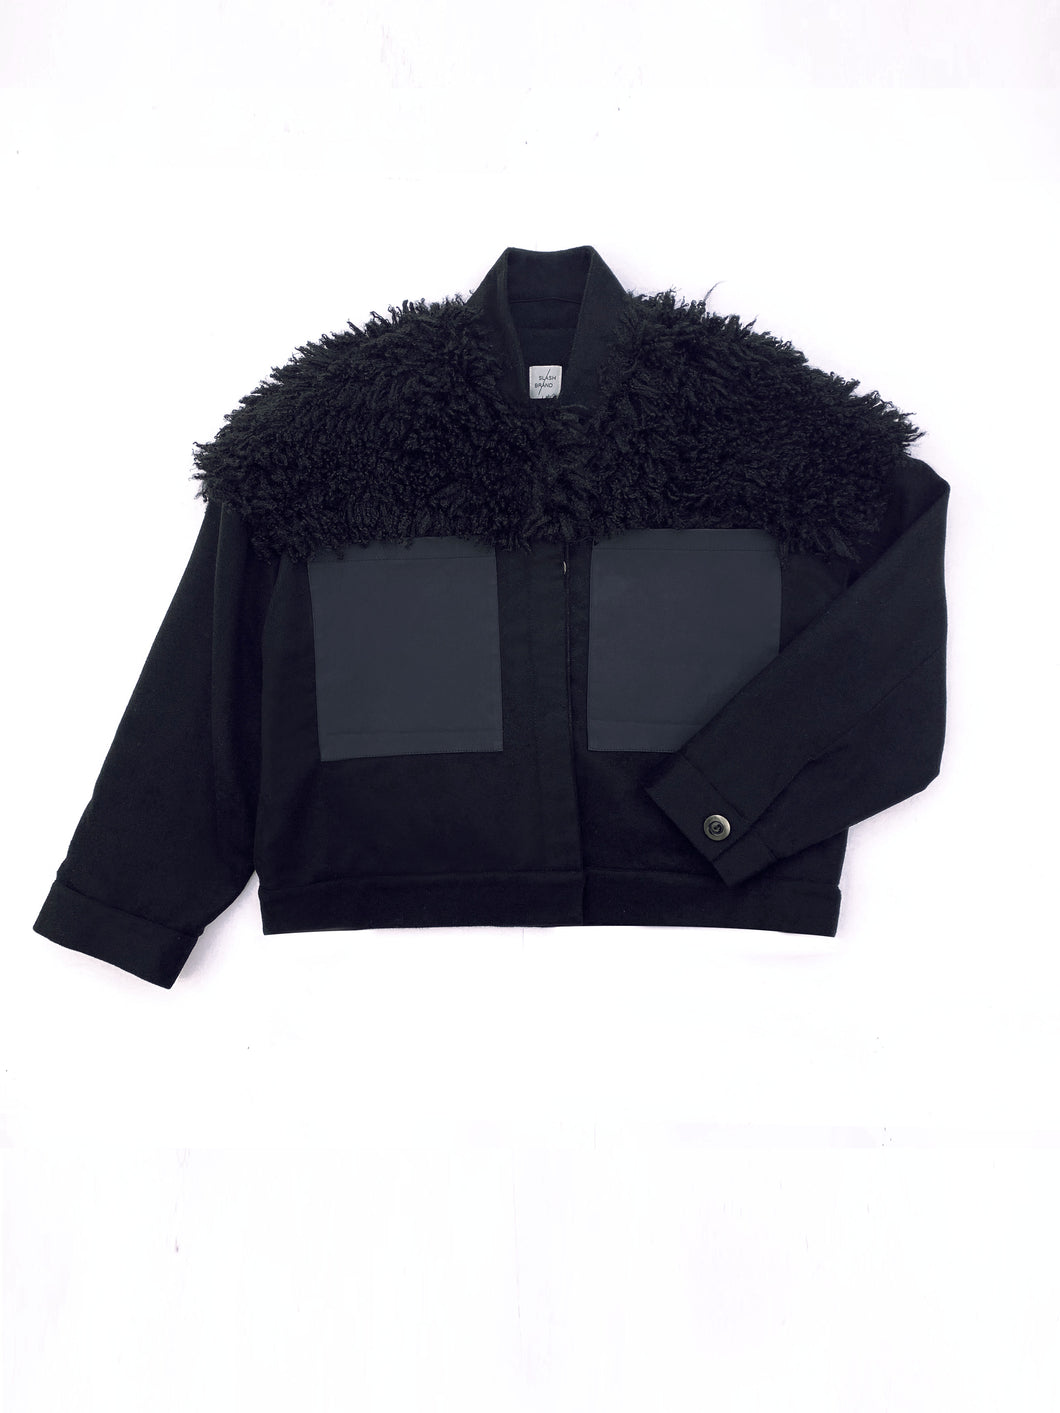 Black Oversized Jacket with Sheep Faux Fur - One-of-a-kind